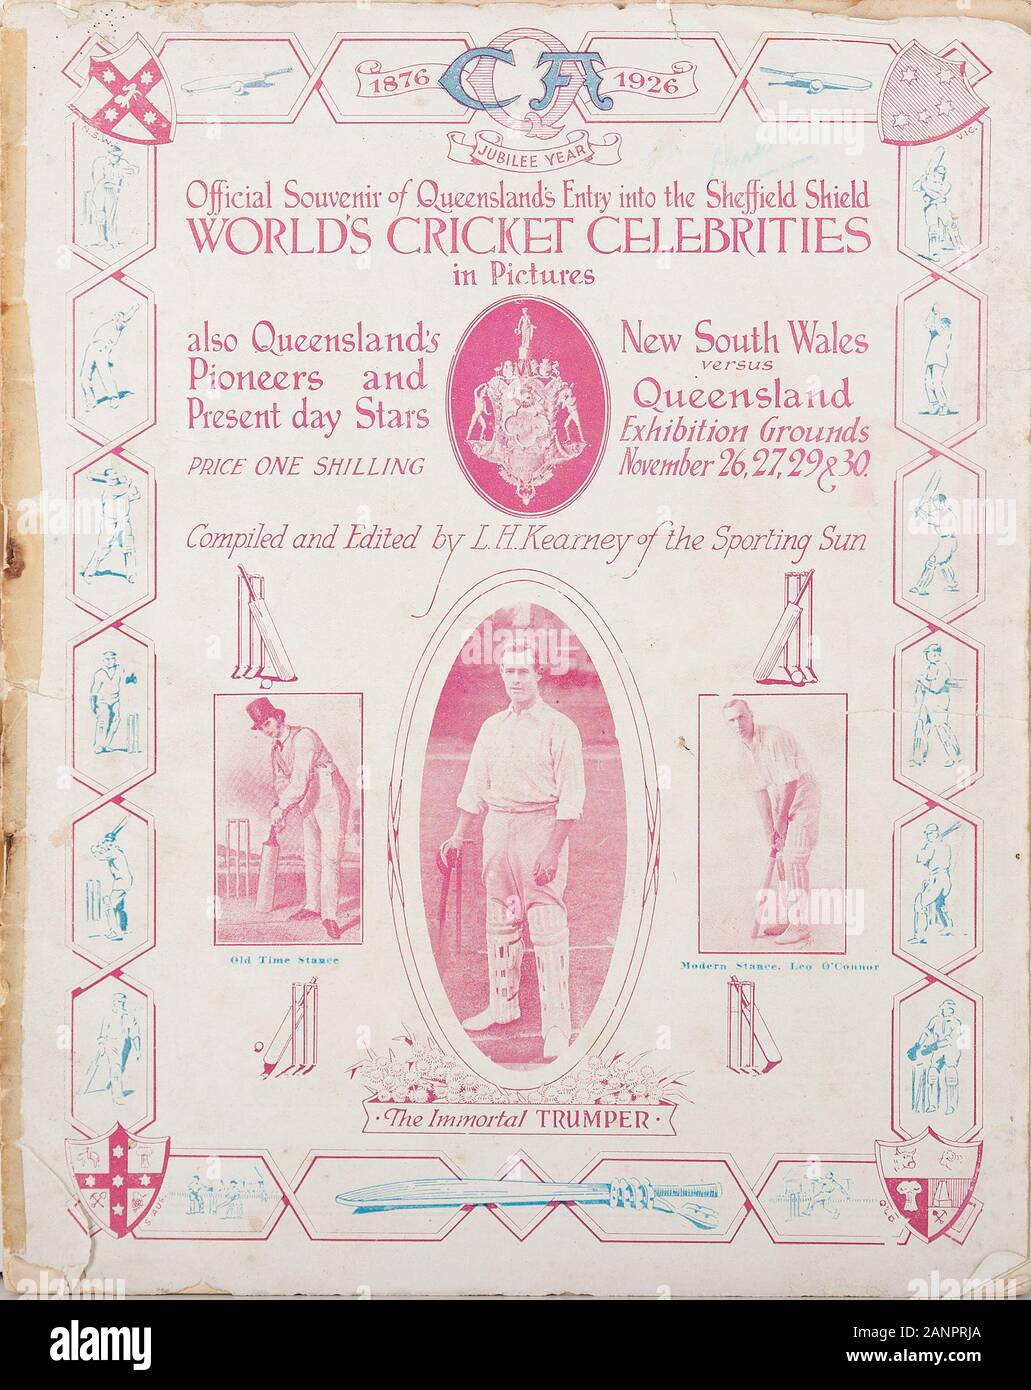 Worlds Cricket Celebrities in pictures poster from 1876-1926 Stock Photo